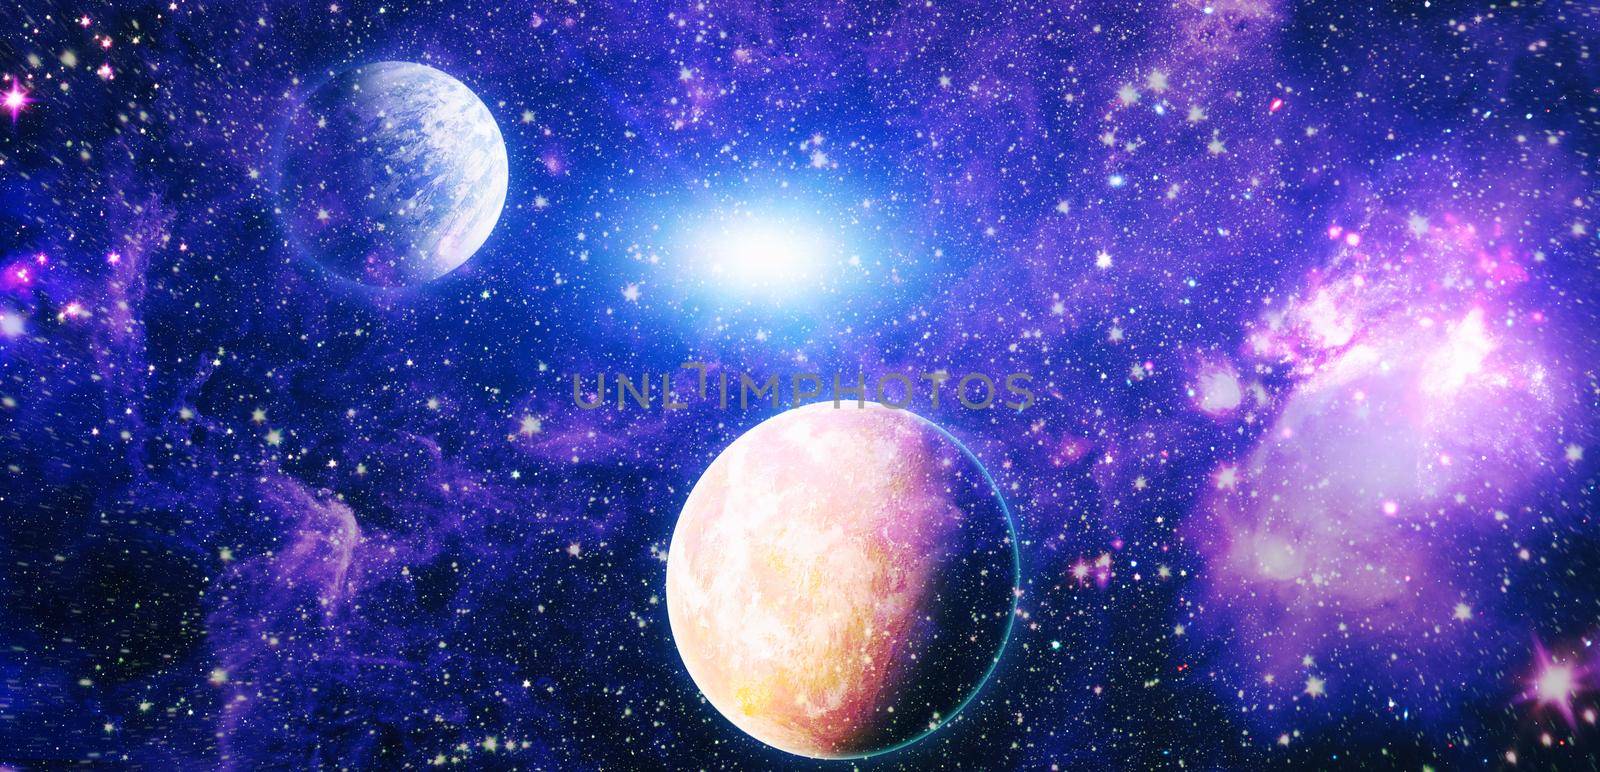 planets, awesome science fiction wallpaper, cosmic landscape. Elements of this image furnished by NASA by Maximusnd